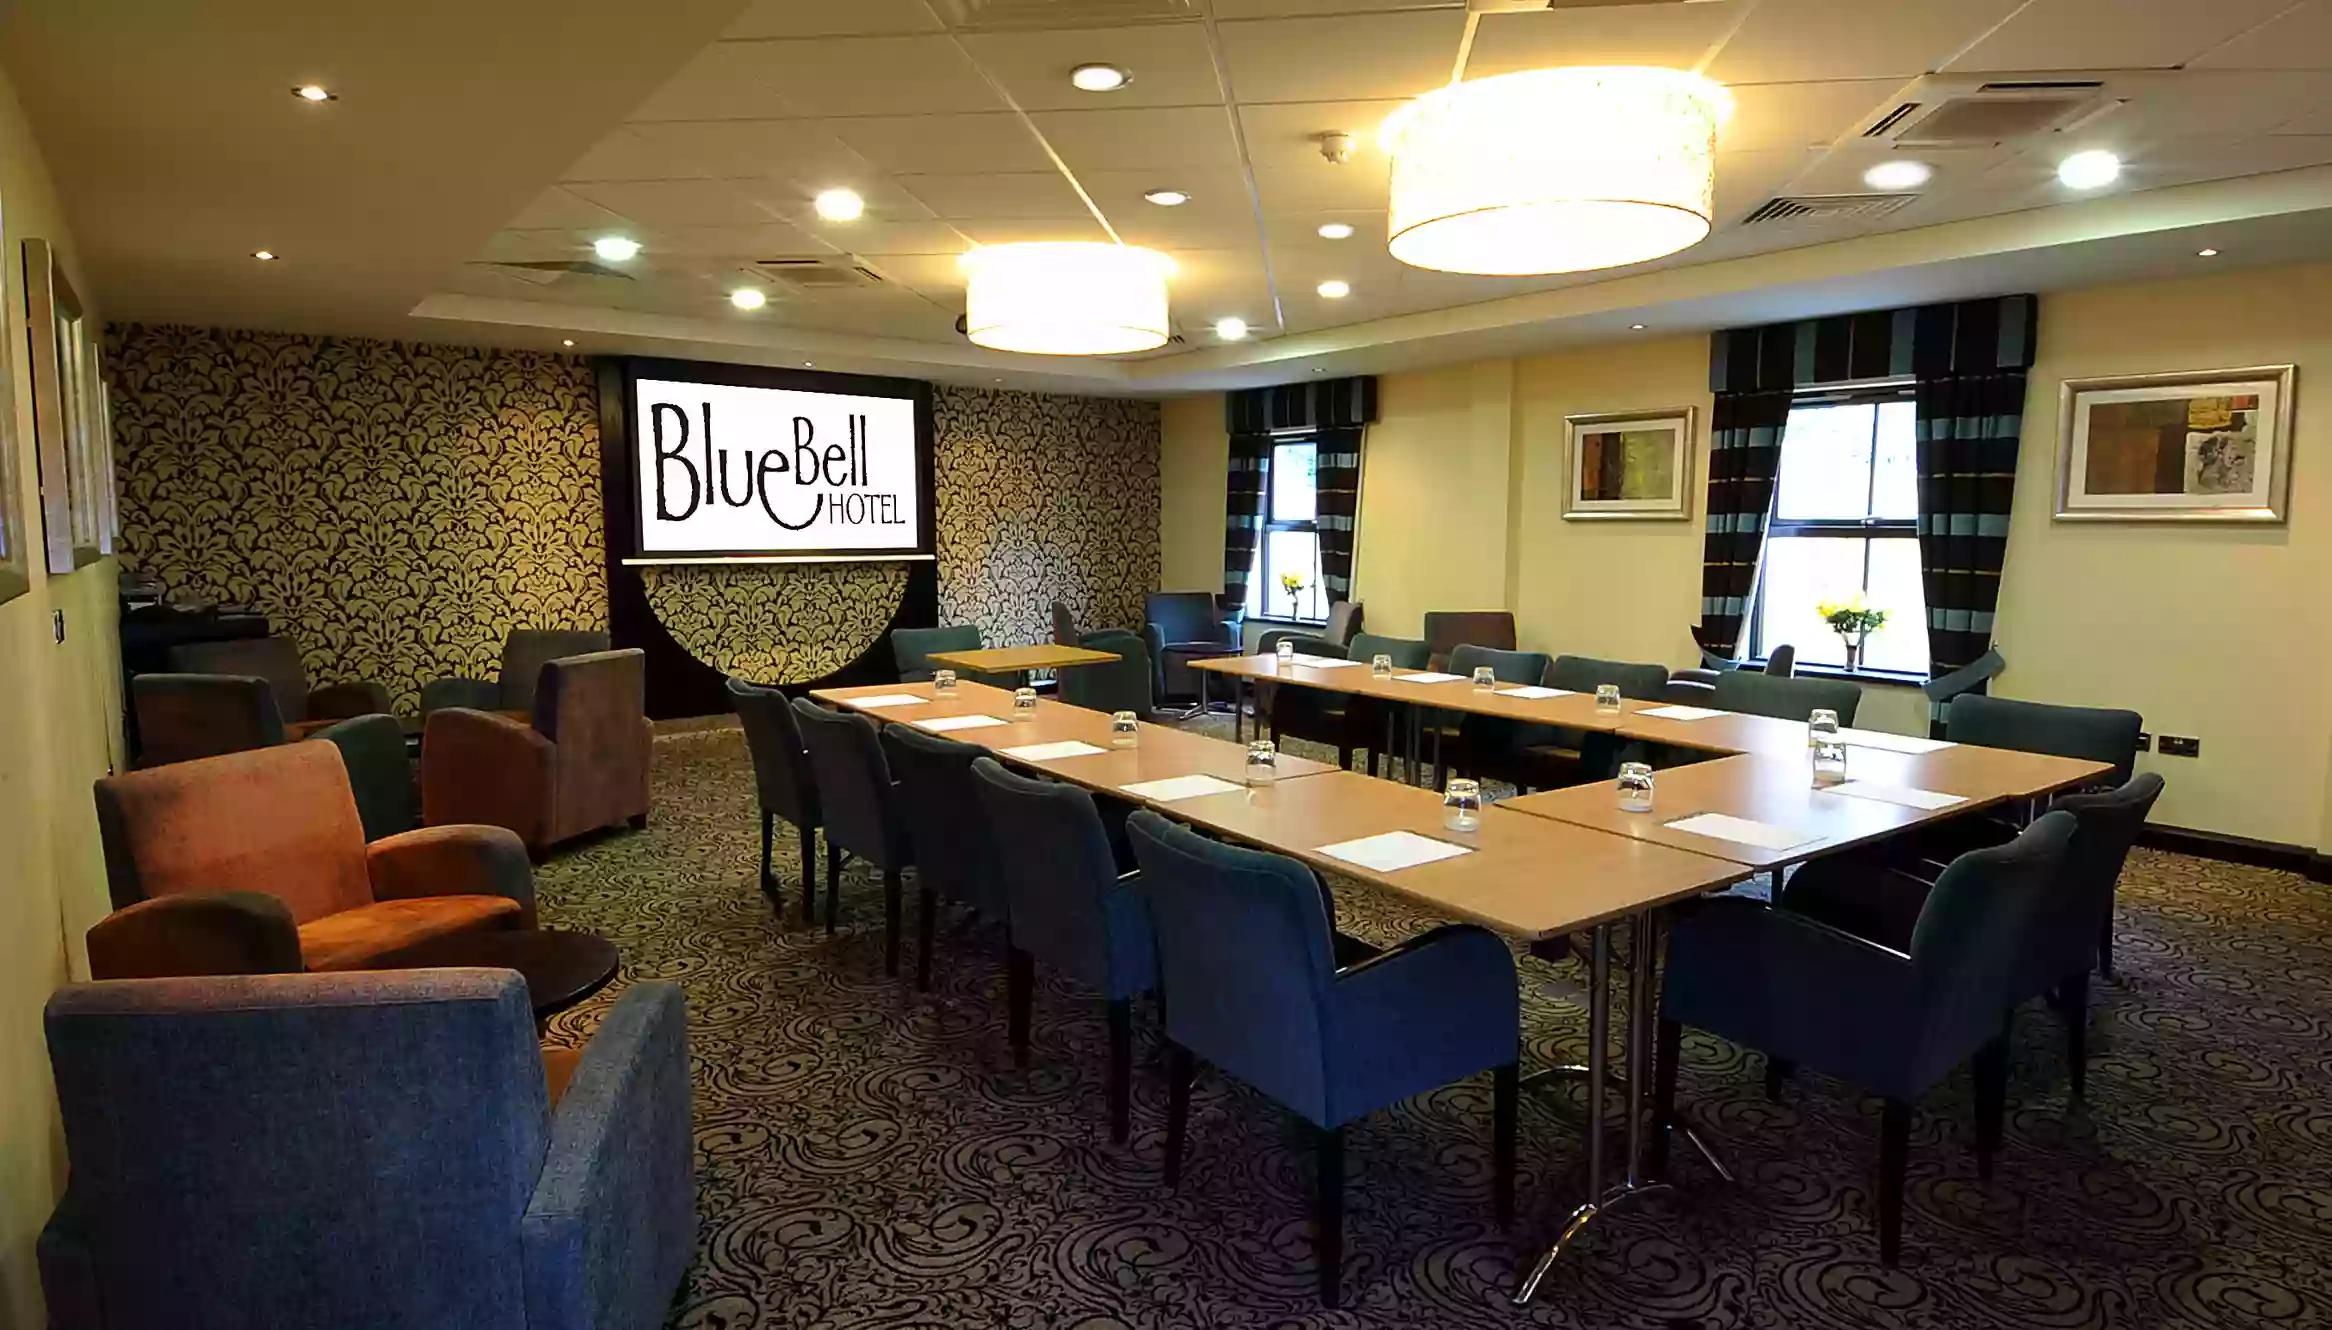 Bluebell Hotel-Best price gauranteed on our website